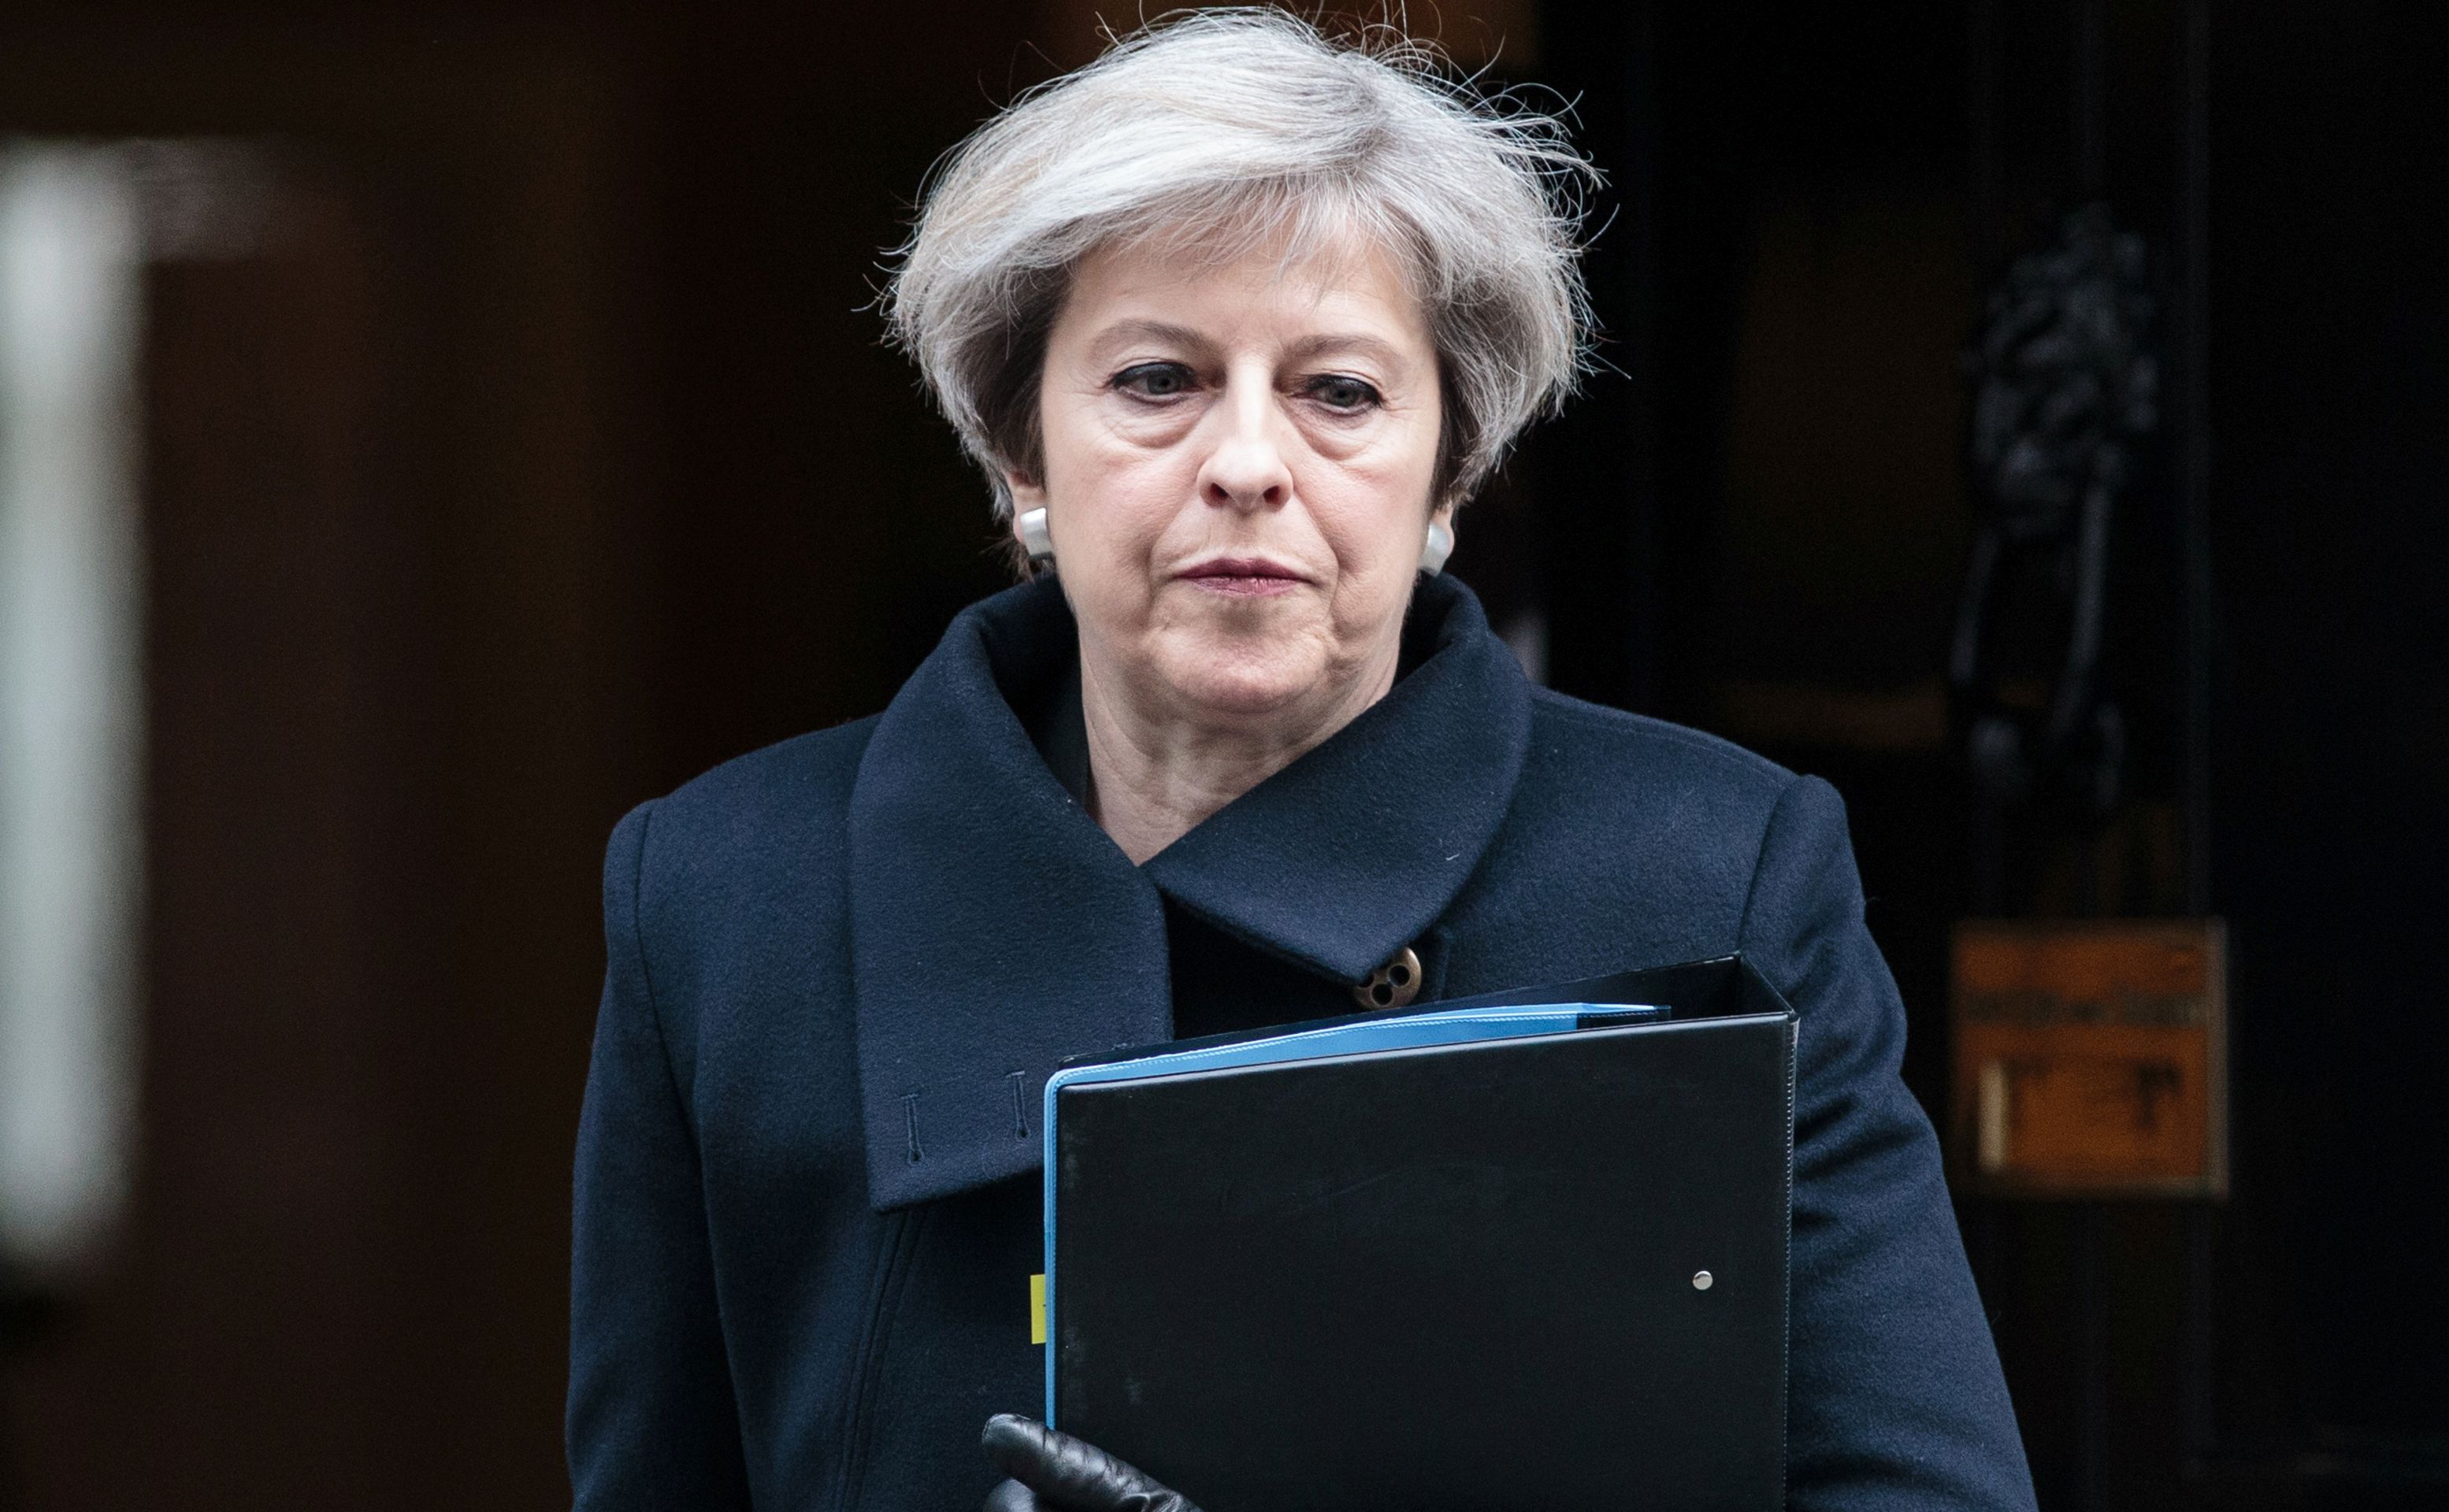 epa05865290 British Prime Minister Theresa May leaves Downing Street in central London, England, 17 March 2017. The British Prime Minister Theresa May spoke on 22 March 2017 after a terrorist attack took place in Westminster, saying Parliament would meet as normal today and 'We will come together as normal'.  PC Keith Palmer and three others lost their lives in the attack and the perpetrator was shot dead by police.  EPA/JACK TAYLOR / POOL